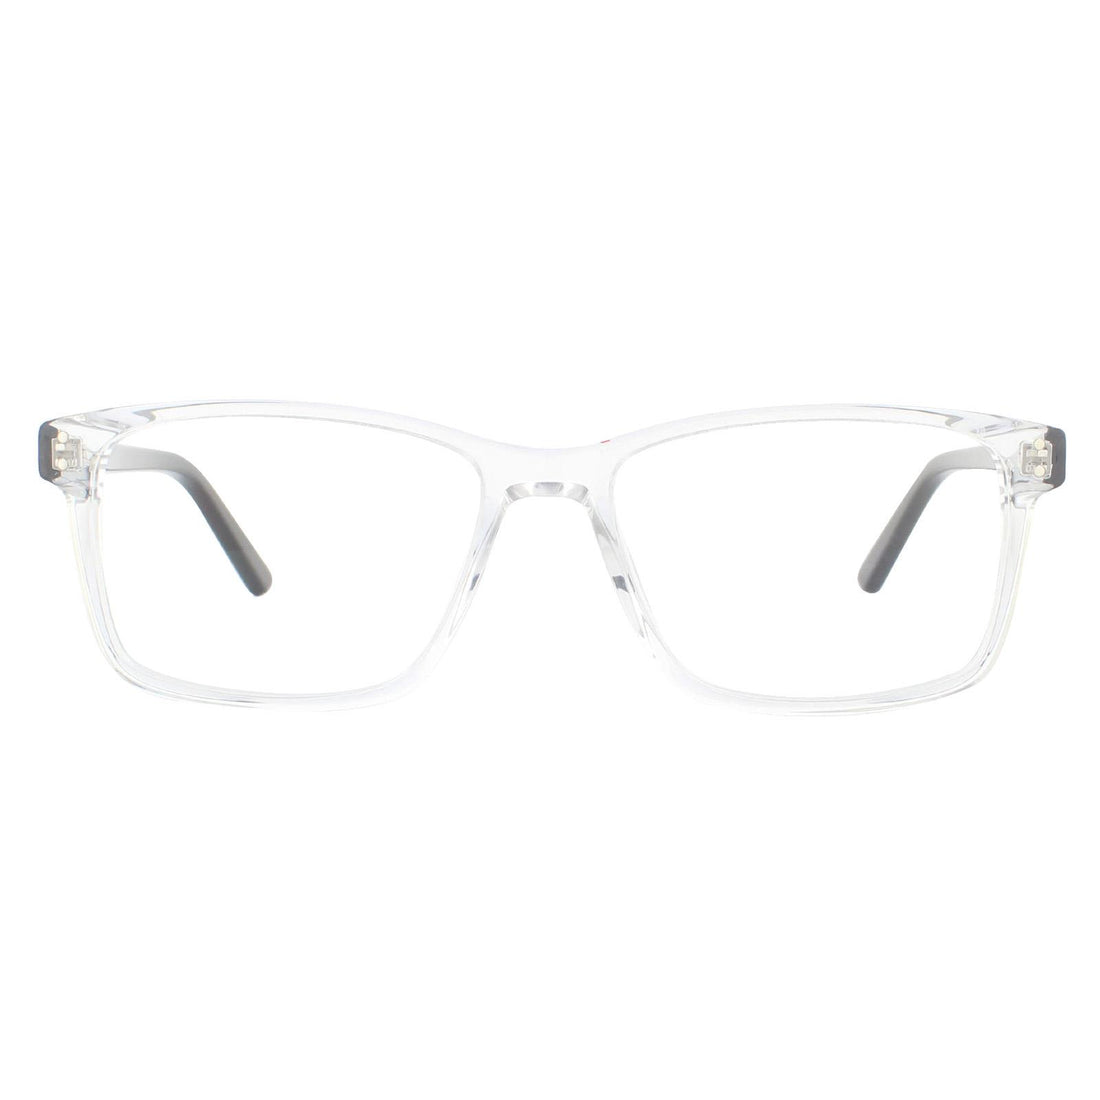 SunOptic A85 Glasses Frames Clear with Black